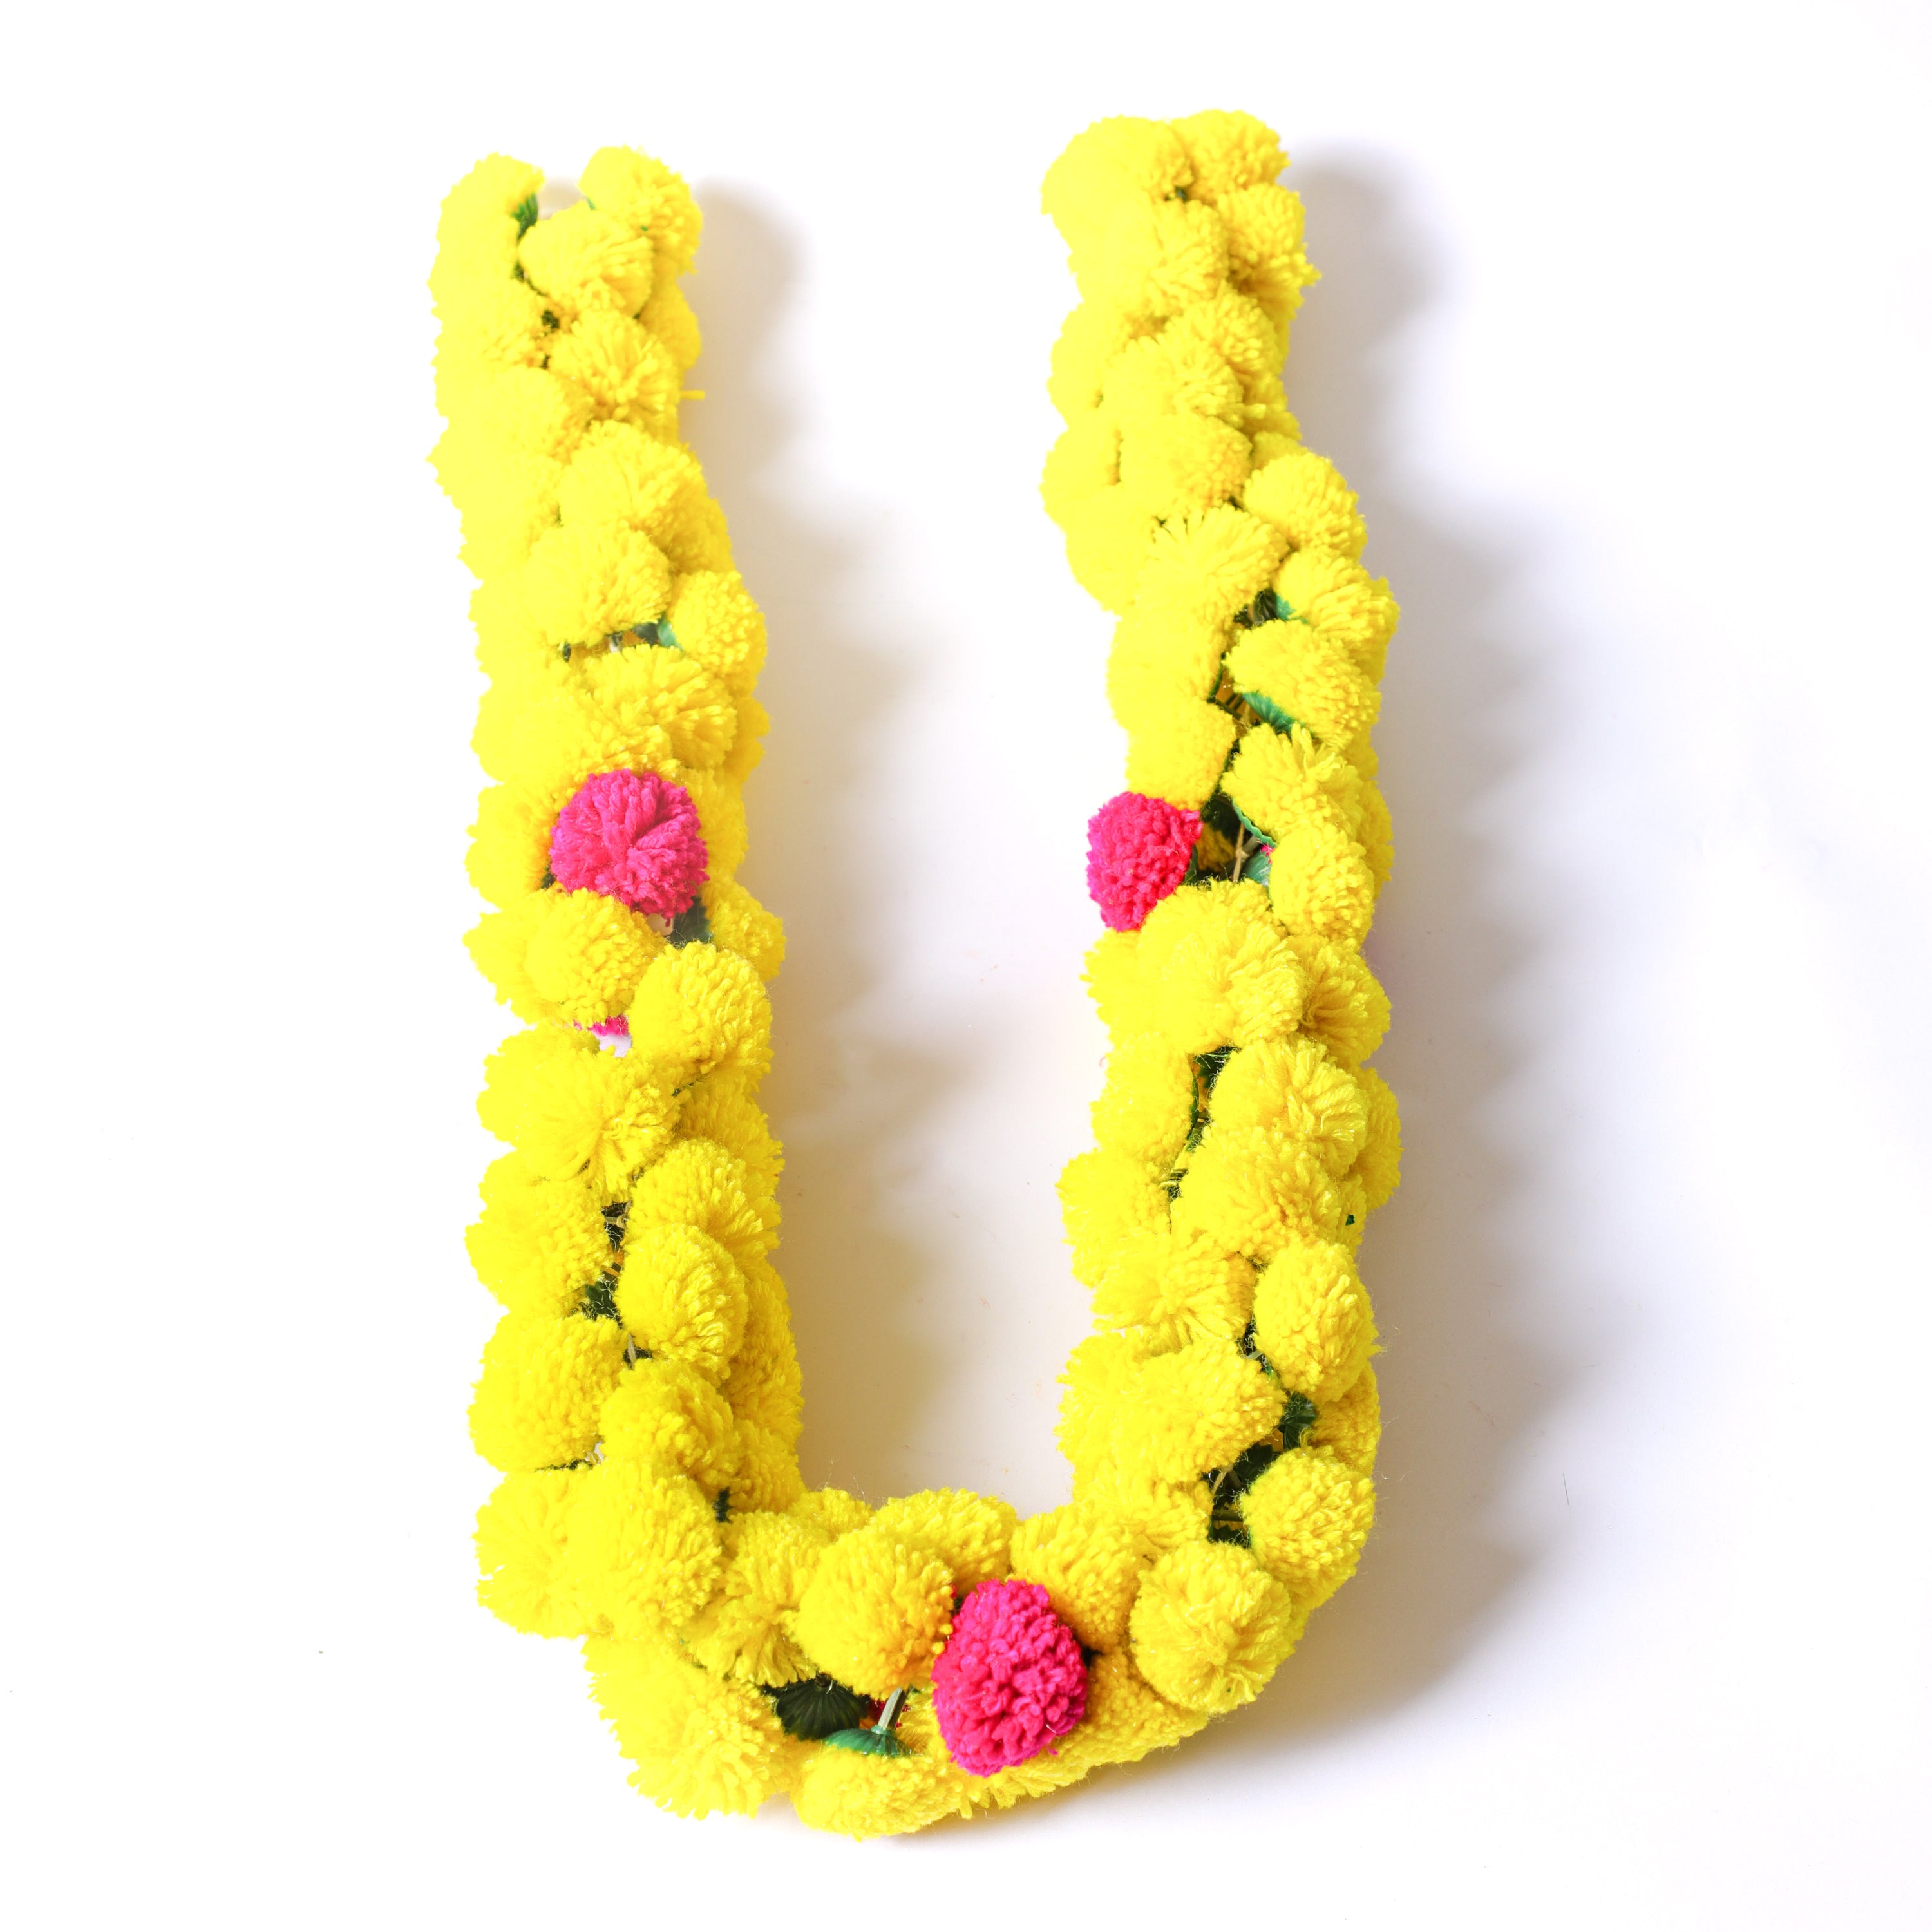 Premium Quality Sturdy Garland for Entryway and Door Decor